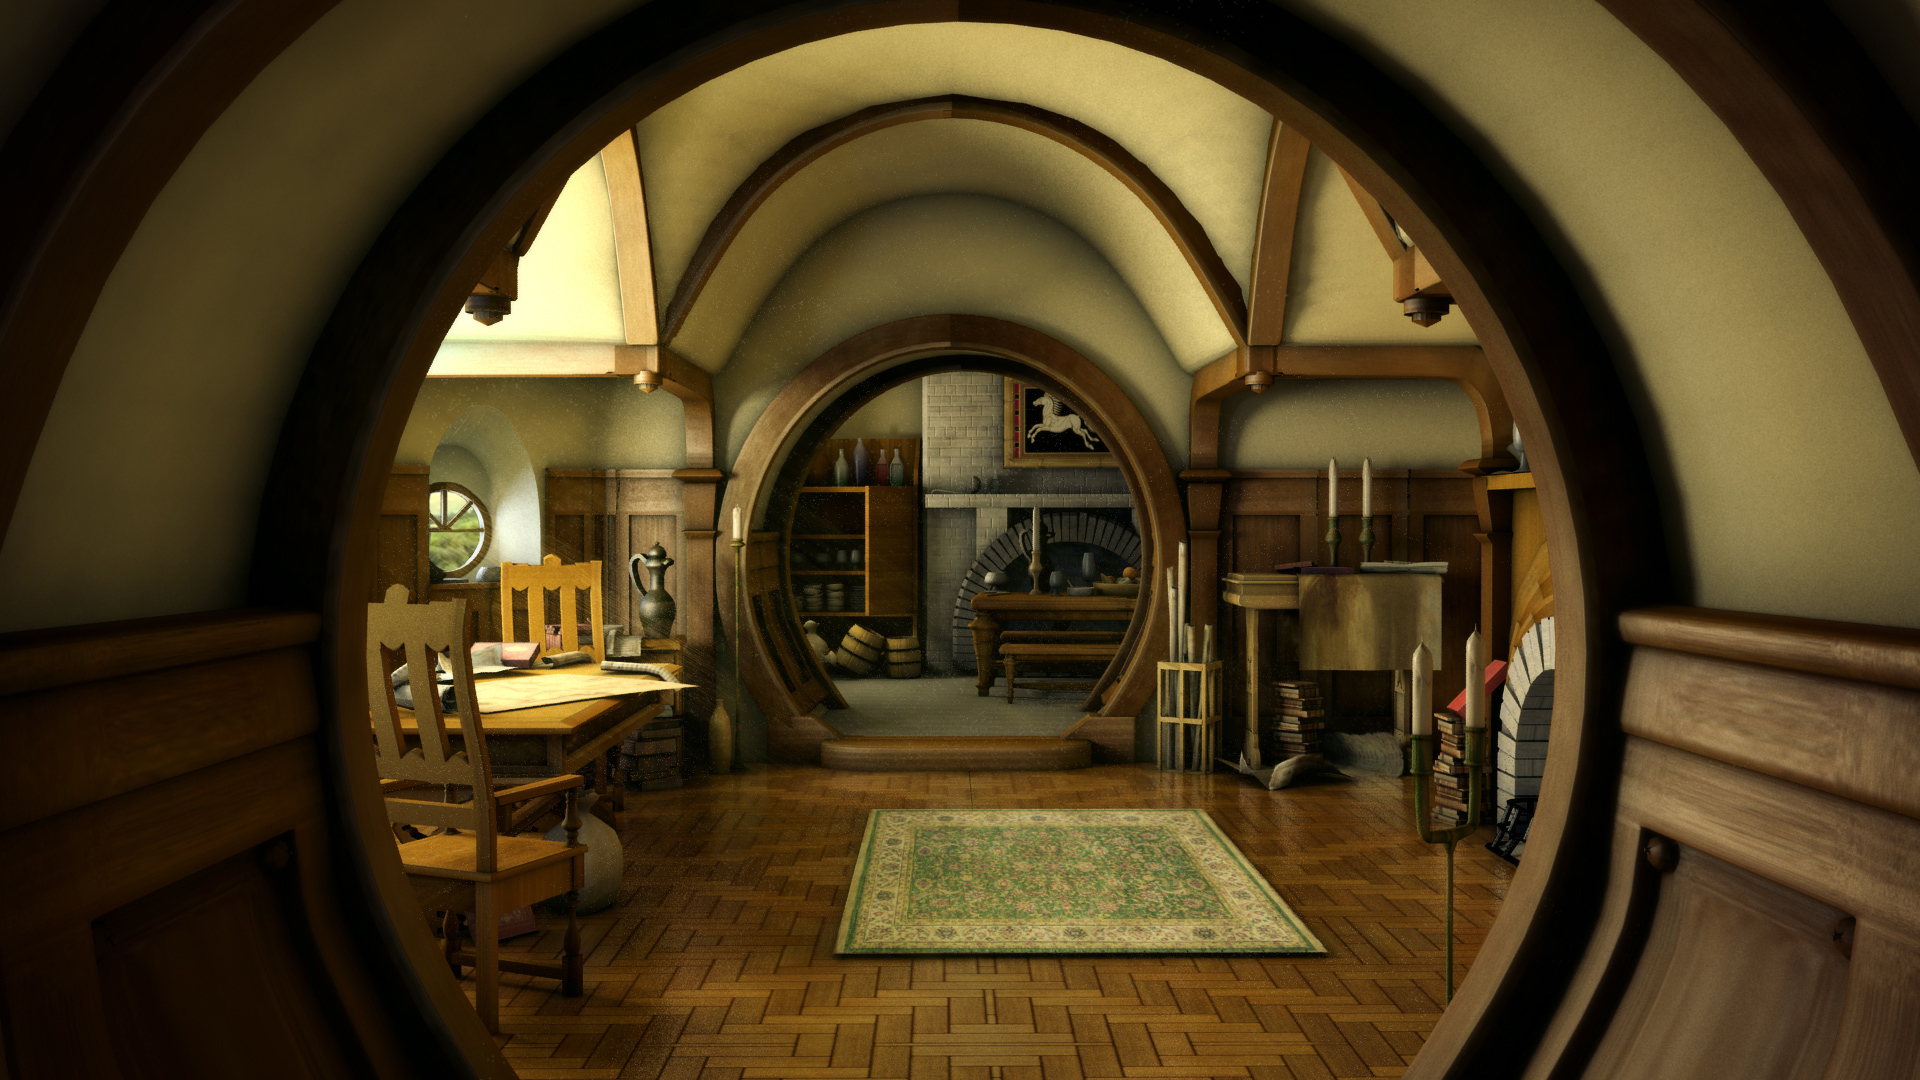 the, Hobbit, Lord, Rings, Lotr, Architecture, House, Room, Building, Fantasy, Interior, Design Wallpaper